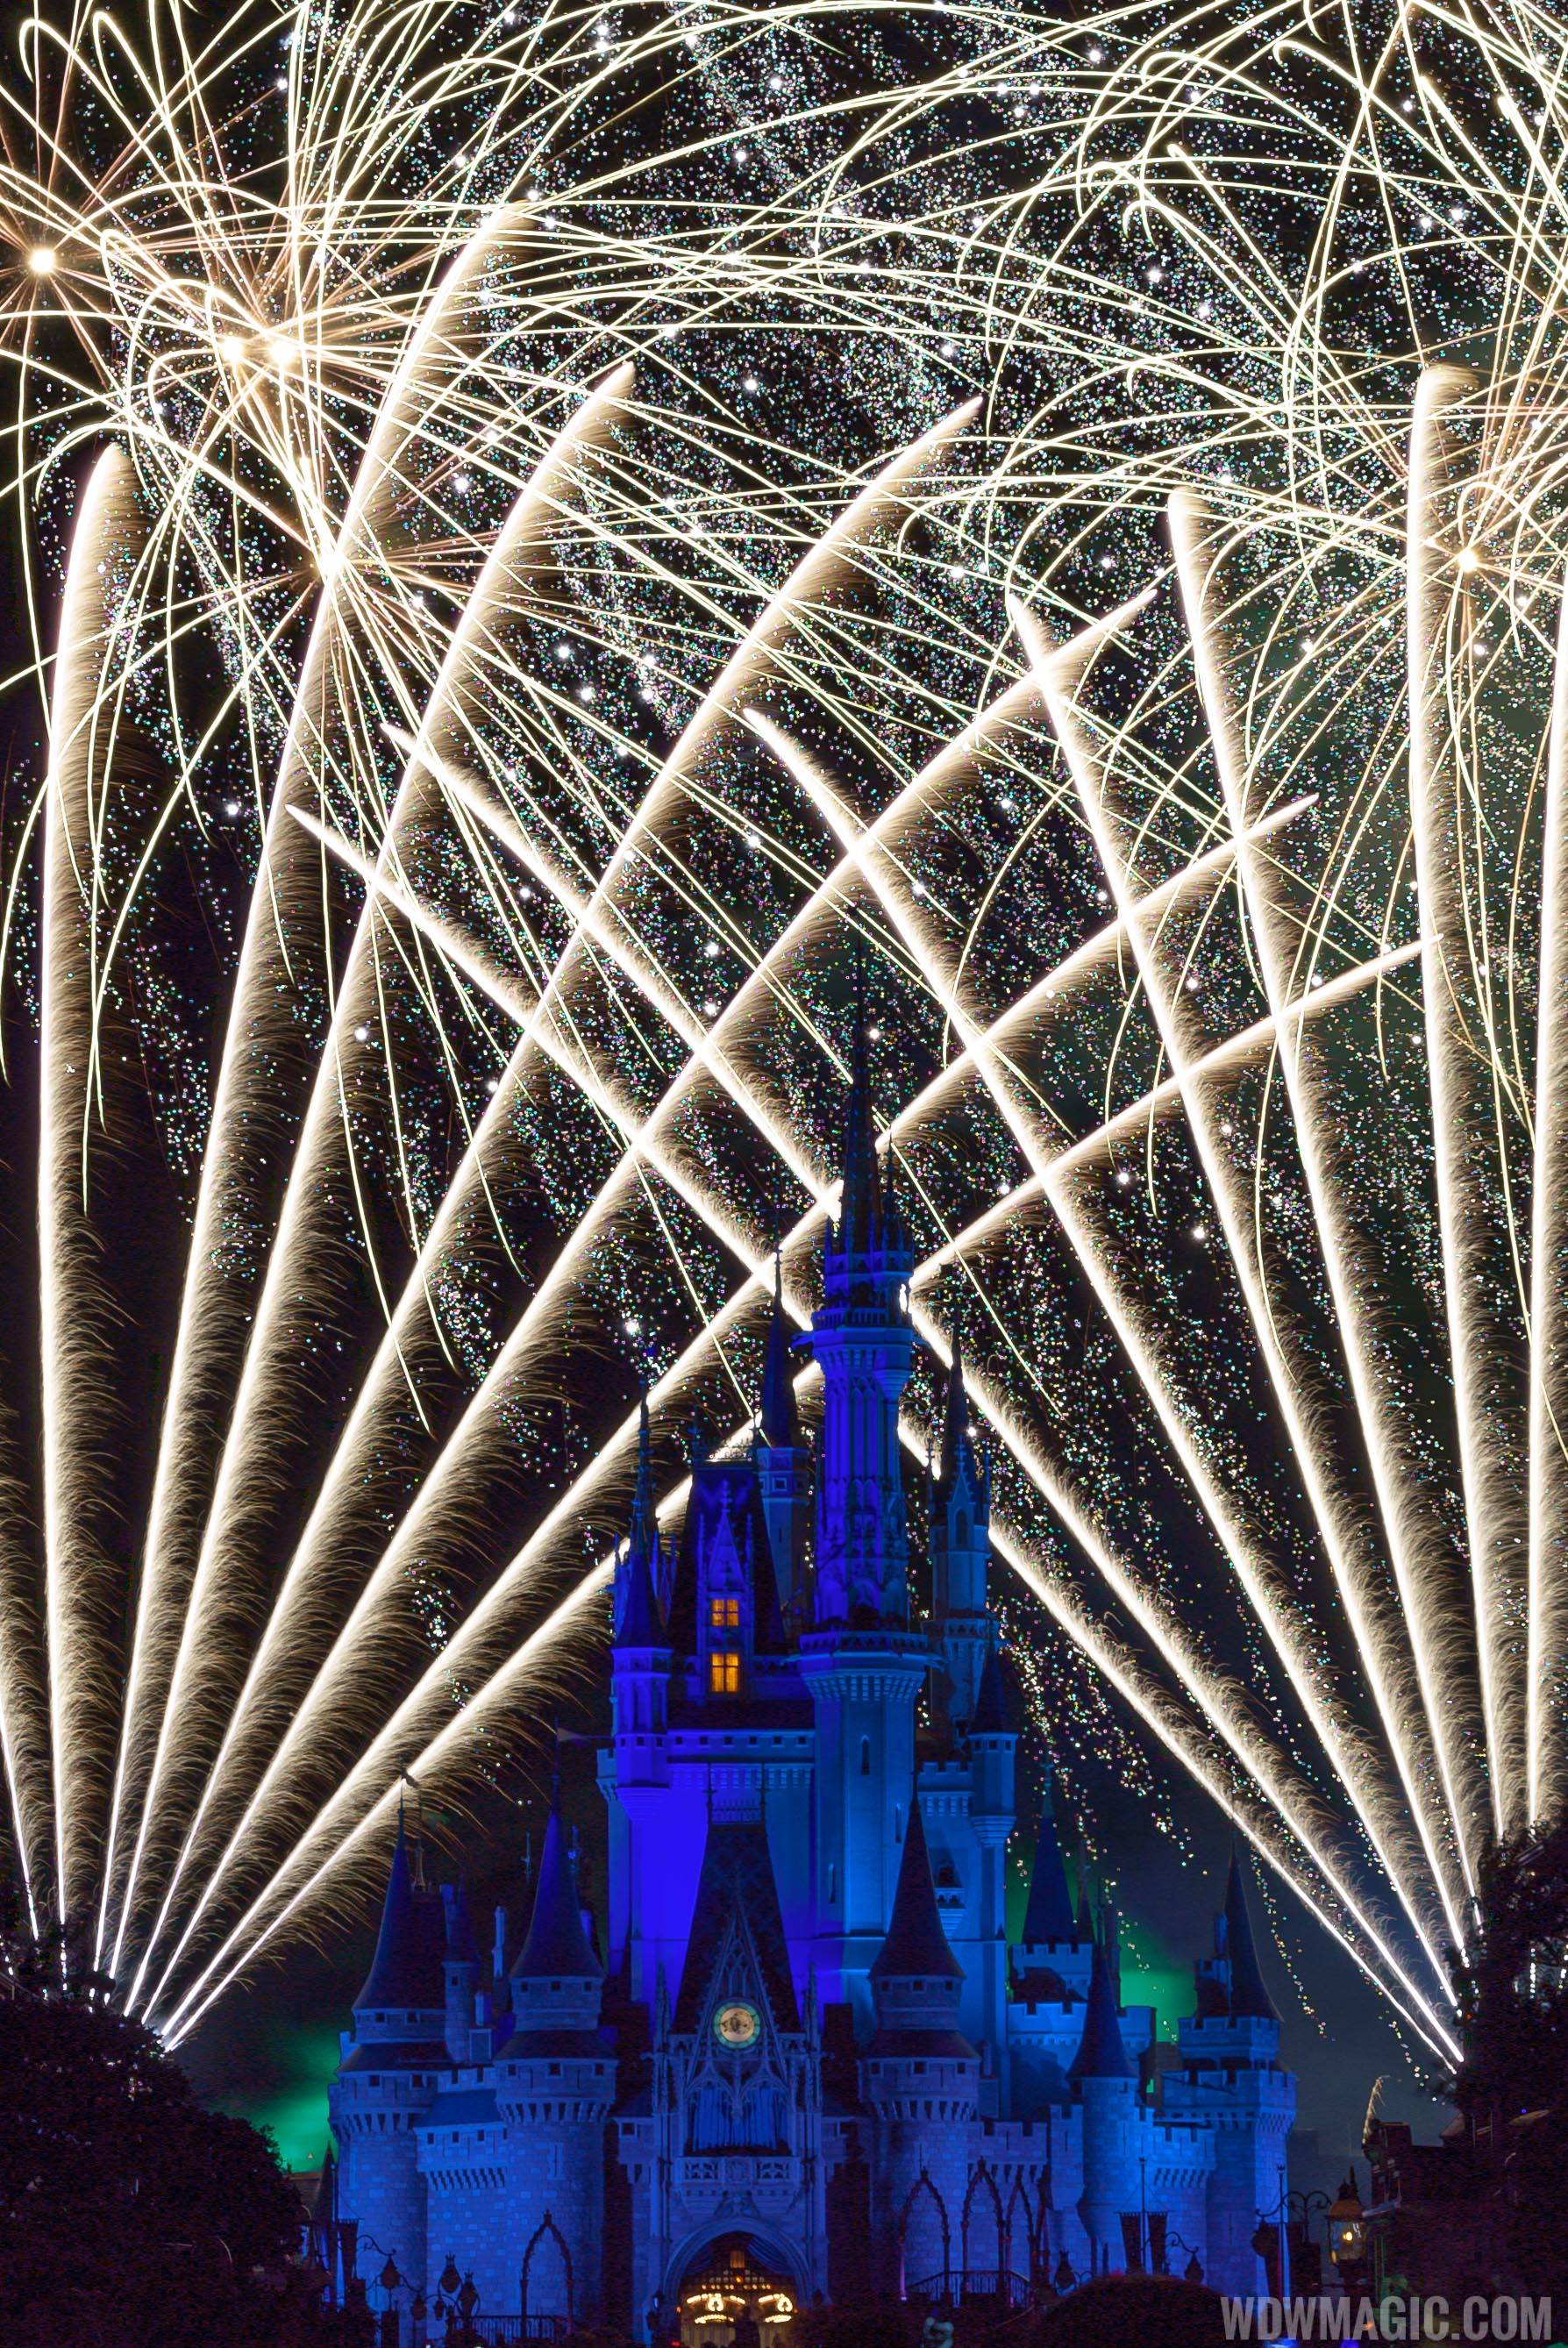 Wishes show